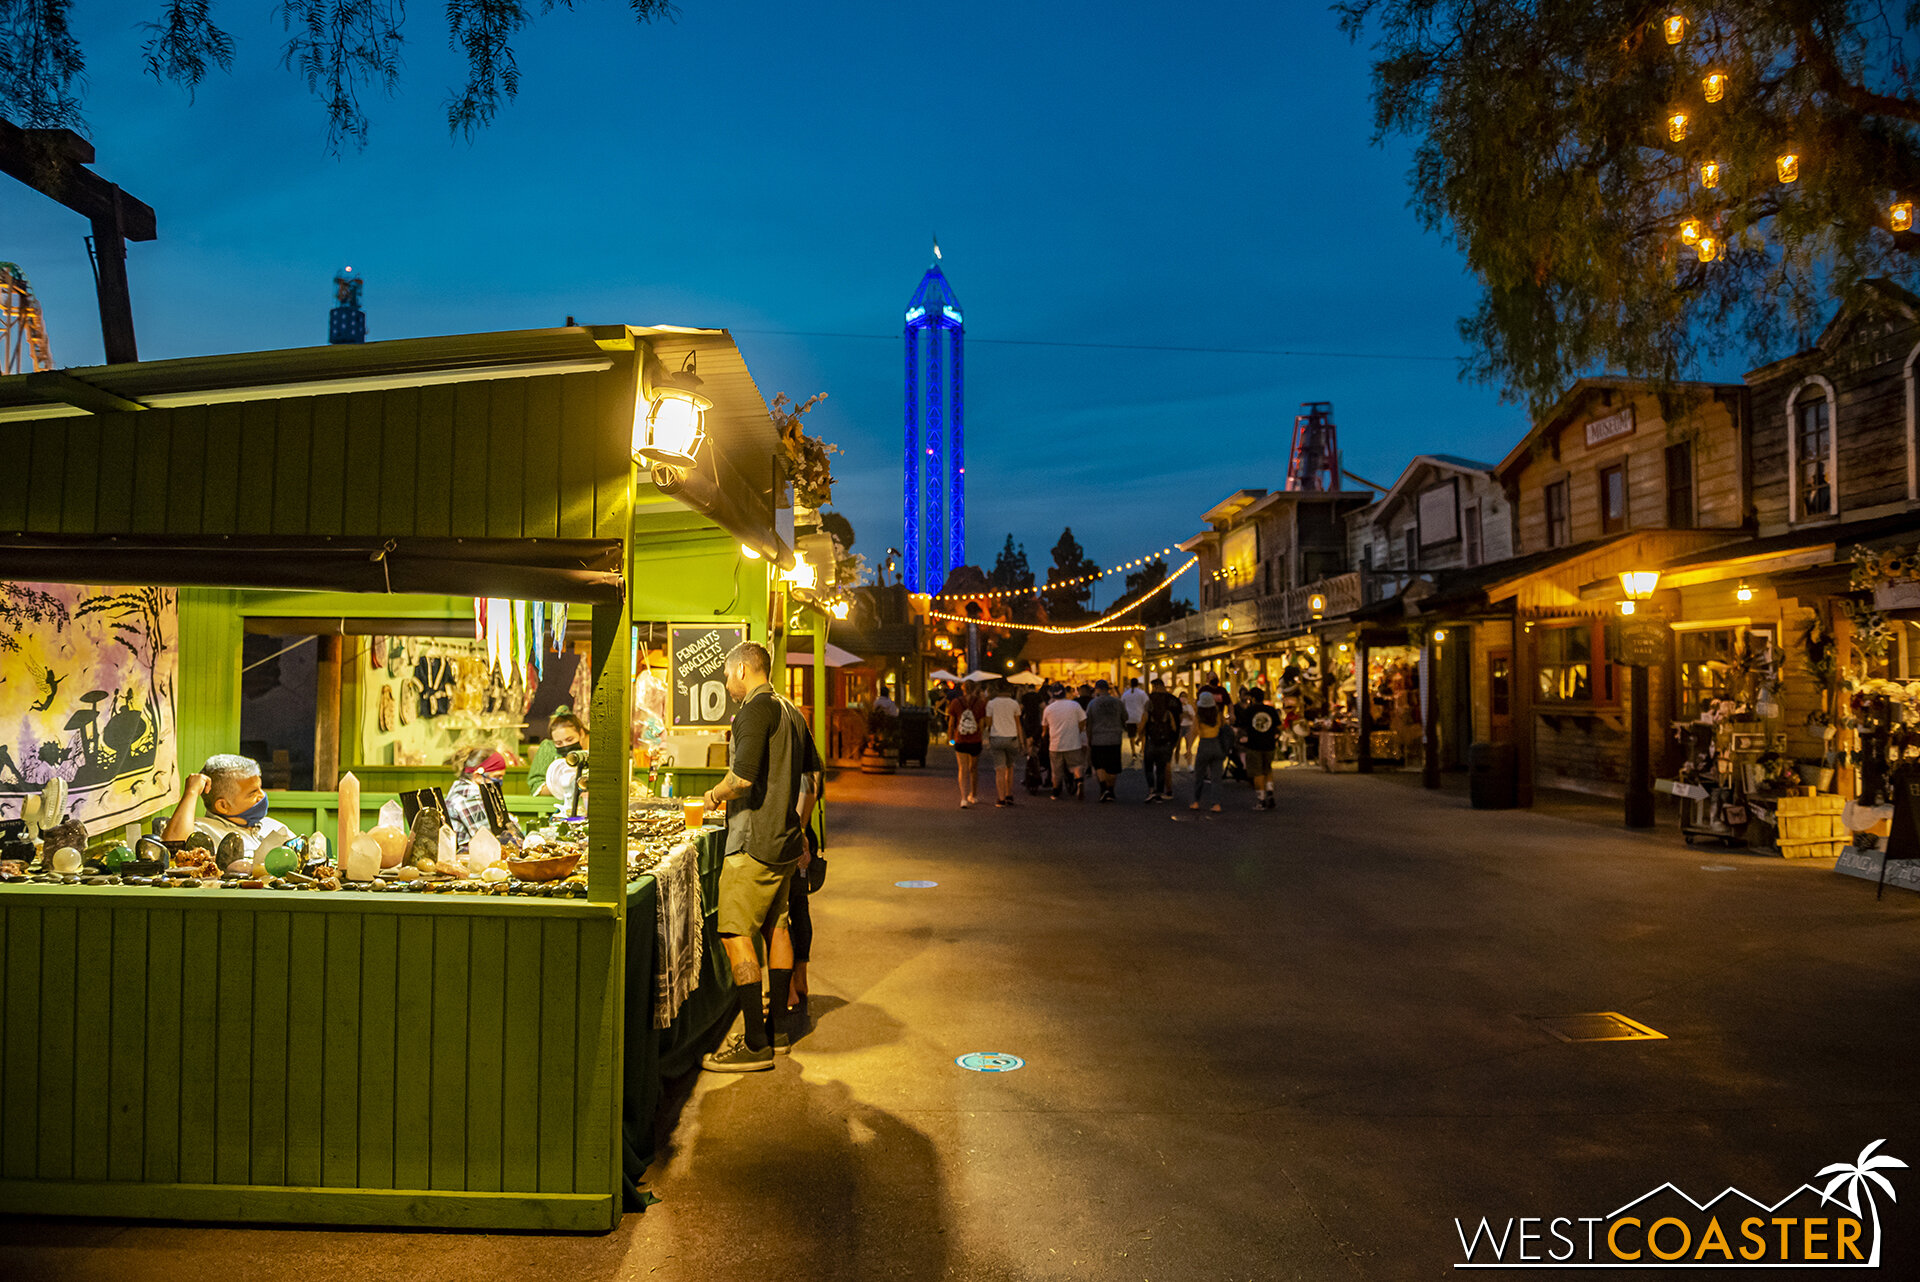  Nighttime in Ghost Town, with the boutique vendor stands still open. 